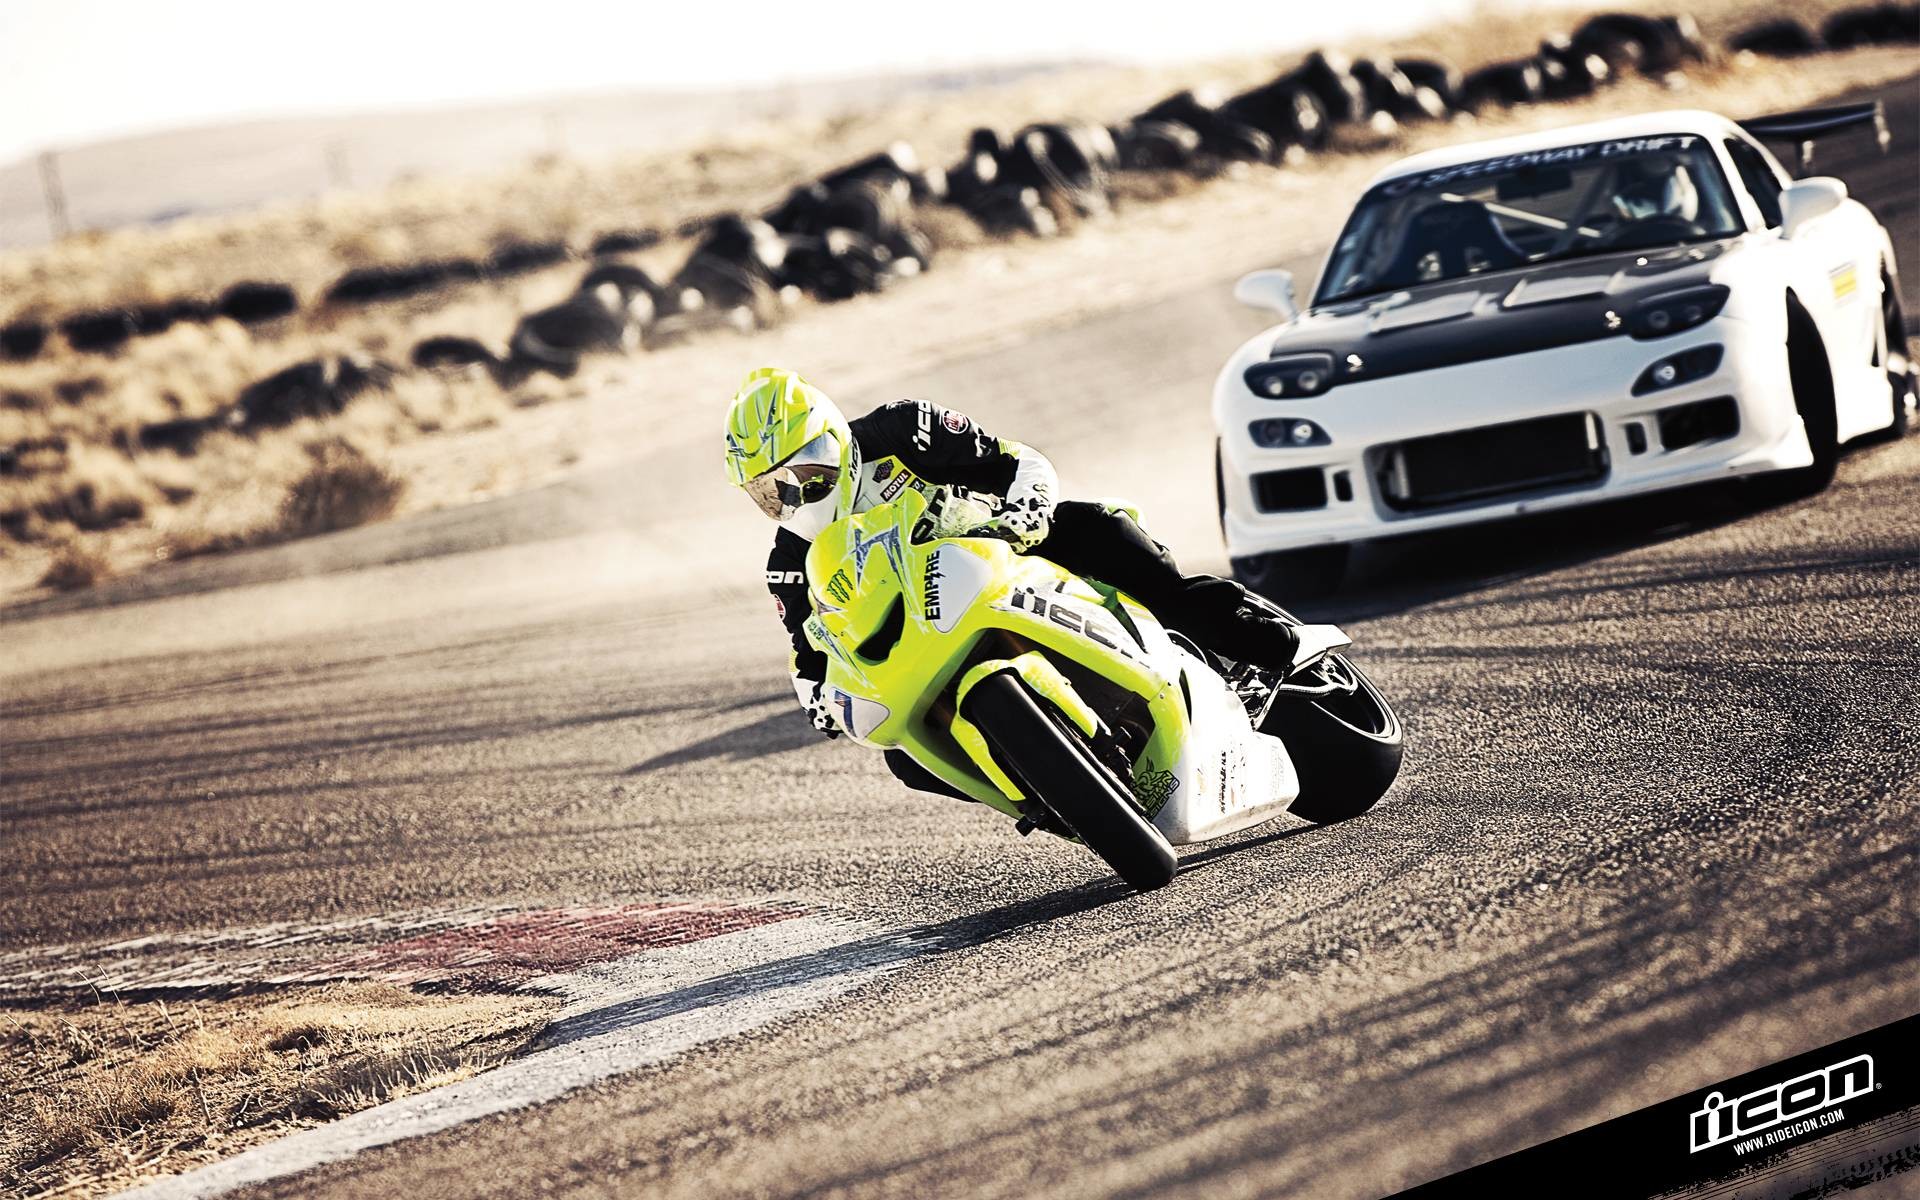 1920x1200 Free Sport Bike and RX7 Drifting Wallpapers, Free Sport Bike and .